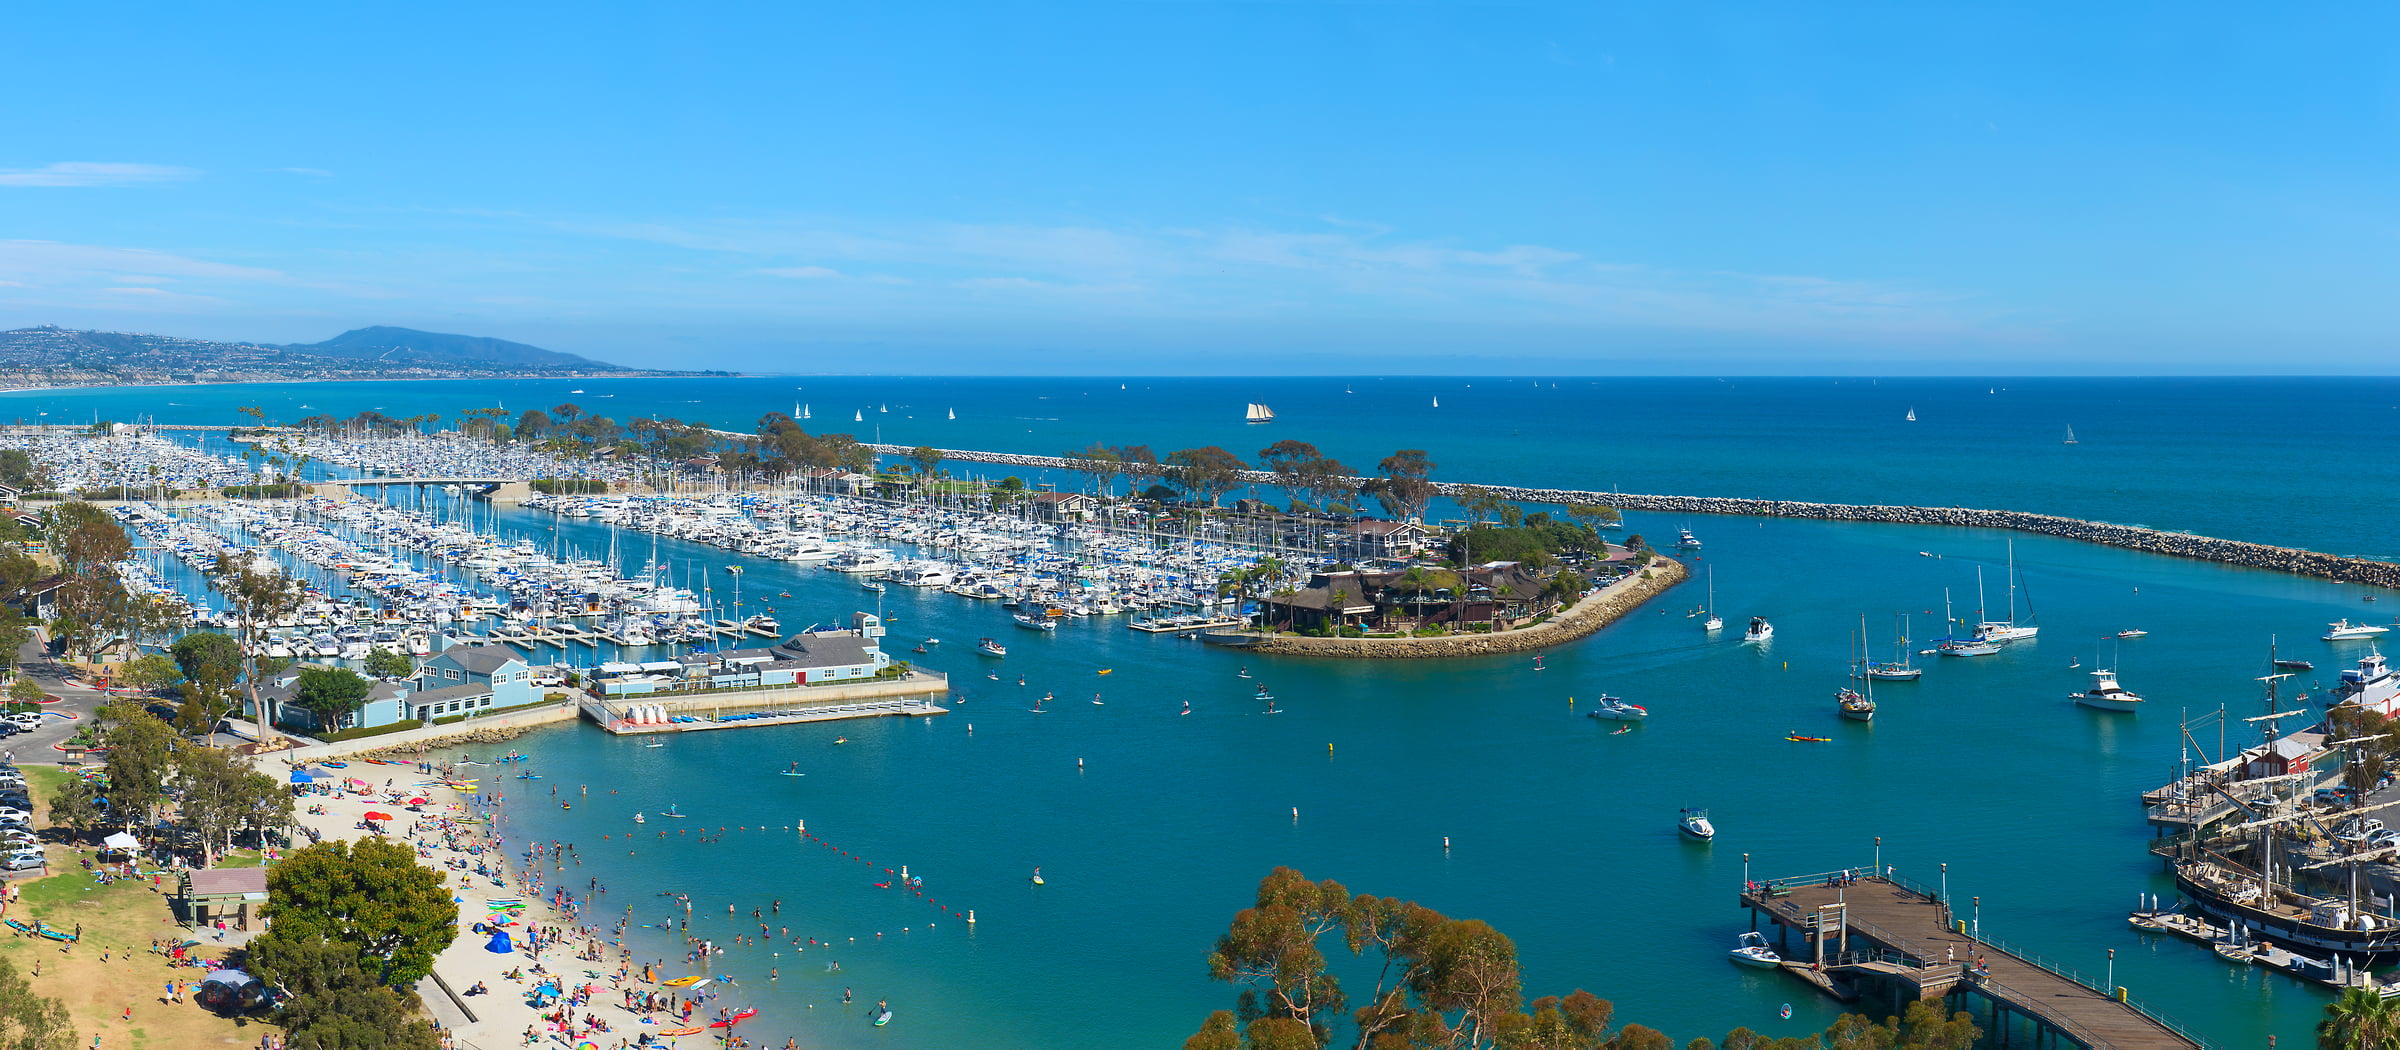 121 megapixels! A very high resolution, large-format VAST photo print of a marina with boats; seascape photograph created by Jim Tarpo in Dana Point, California.